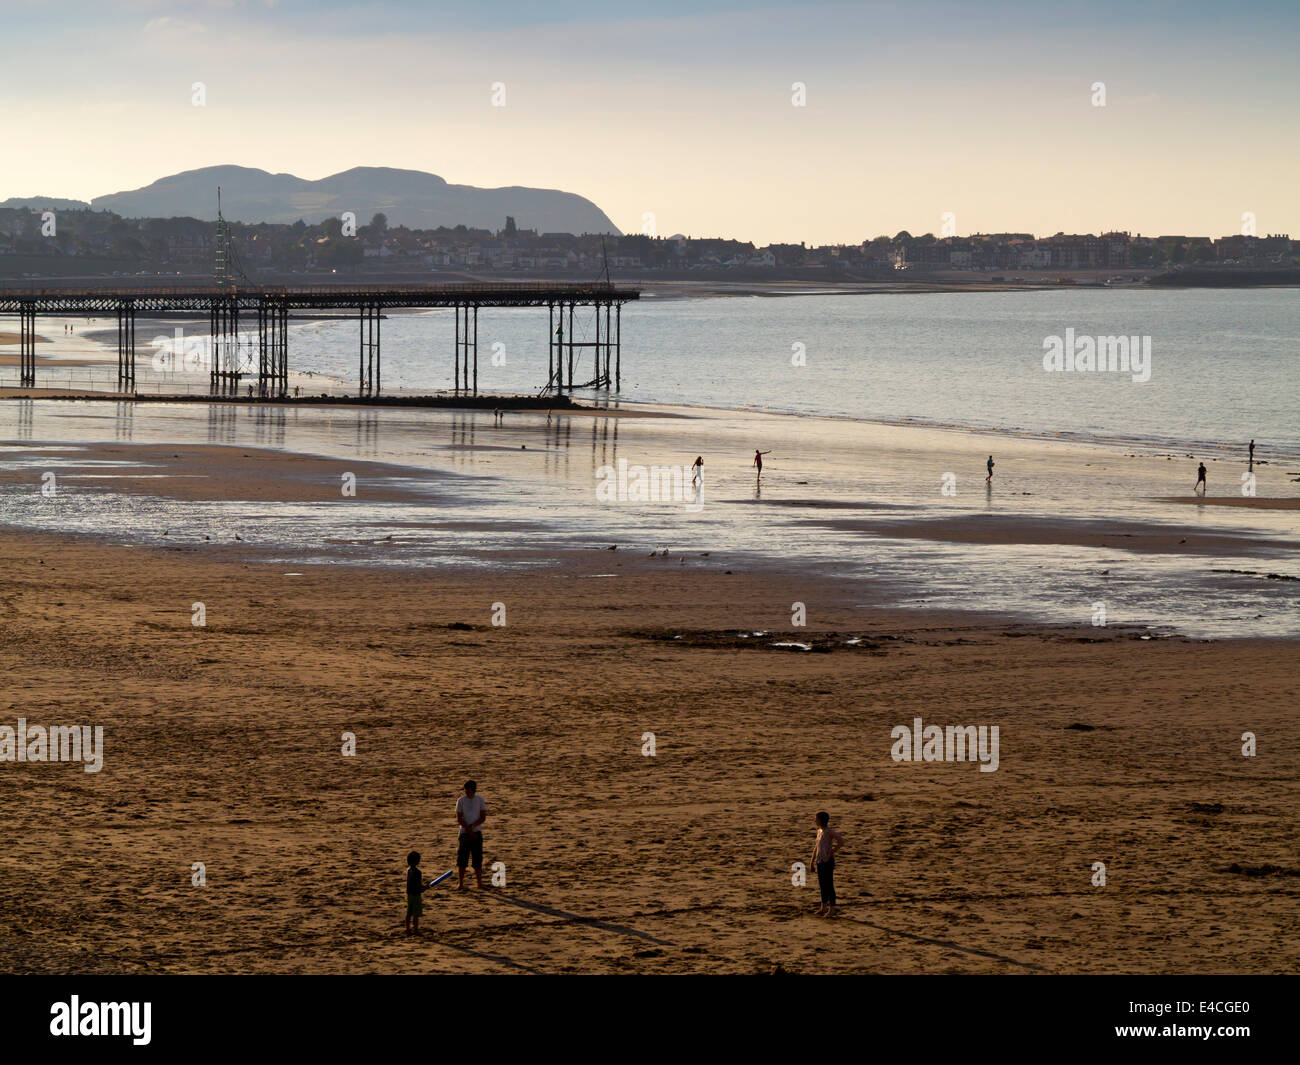 The beach and pier at Colwyn Bay in Conwy a seaside resort on the North Wales coast in the UK Stock Photo